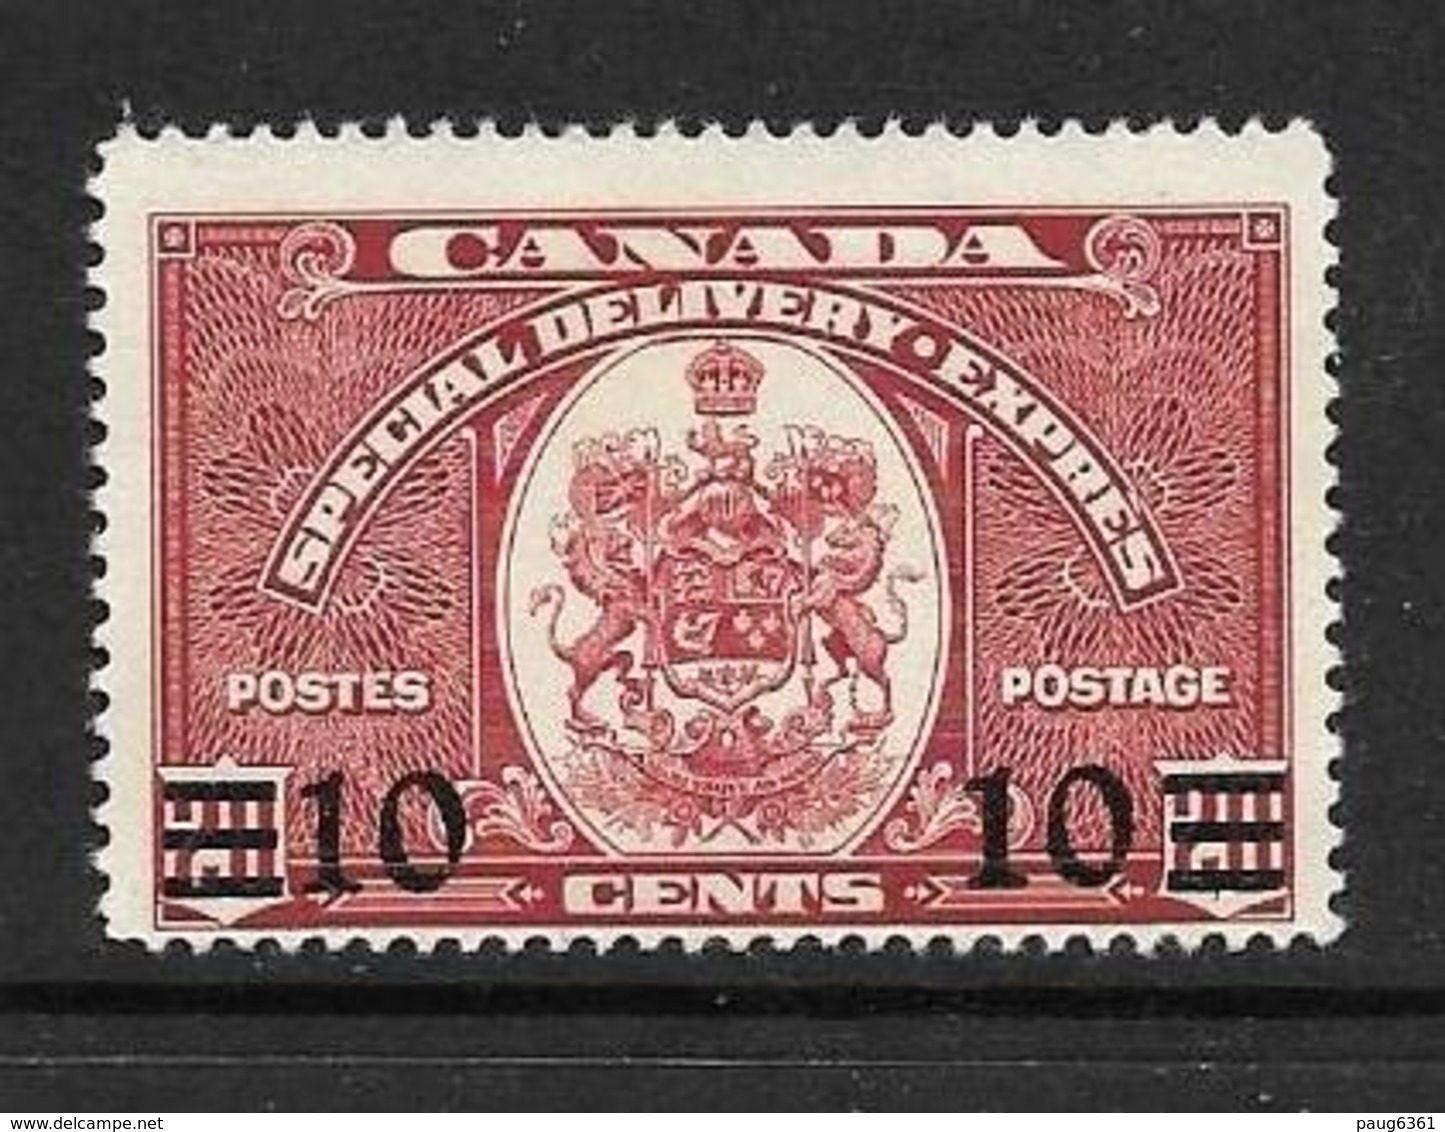 CANADA 1938/39 EXPRES YVERT N°E9 NEUF NG - Special Delivery